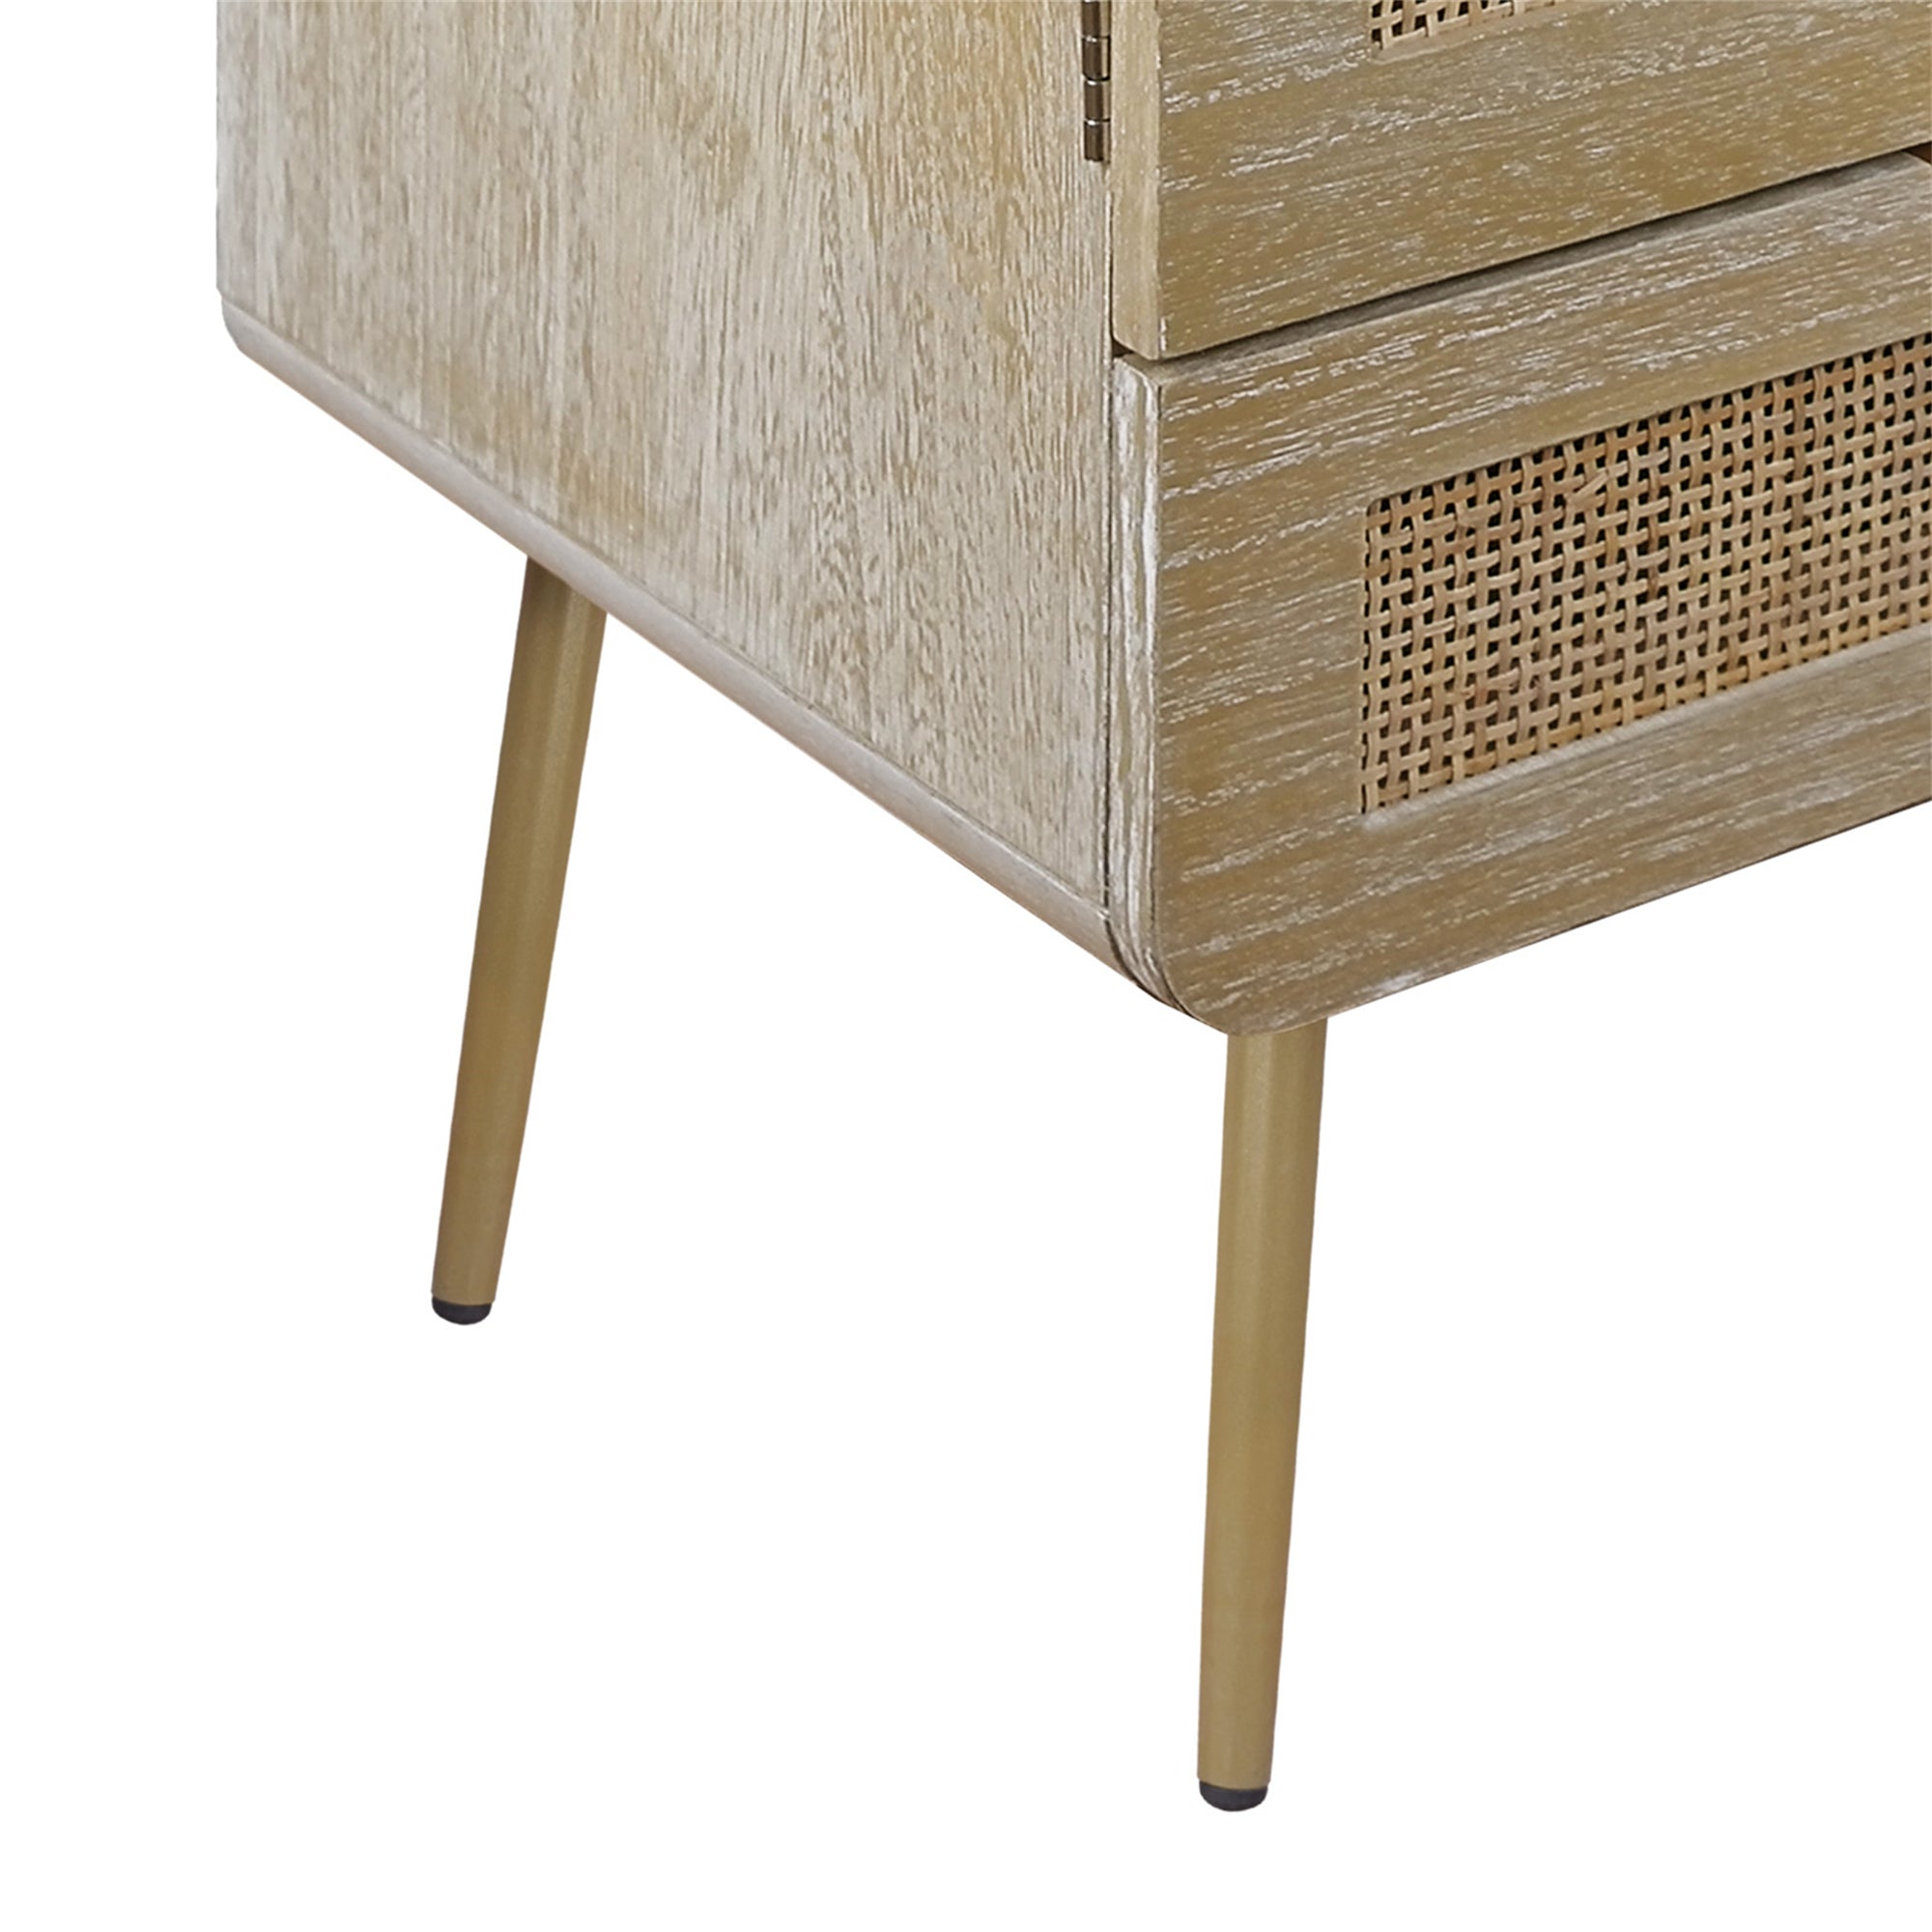 LAGO Natural Wooden Nightstand with Rattan Panel